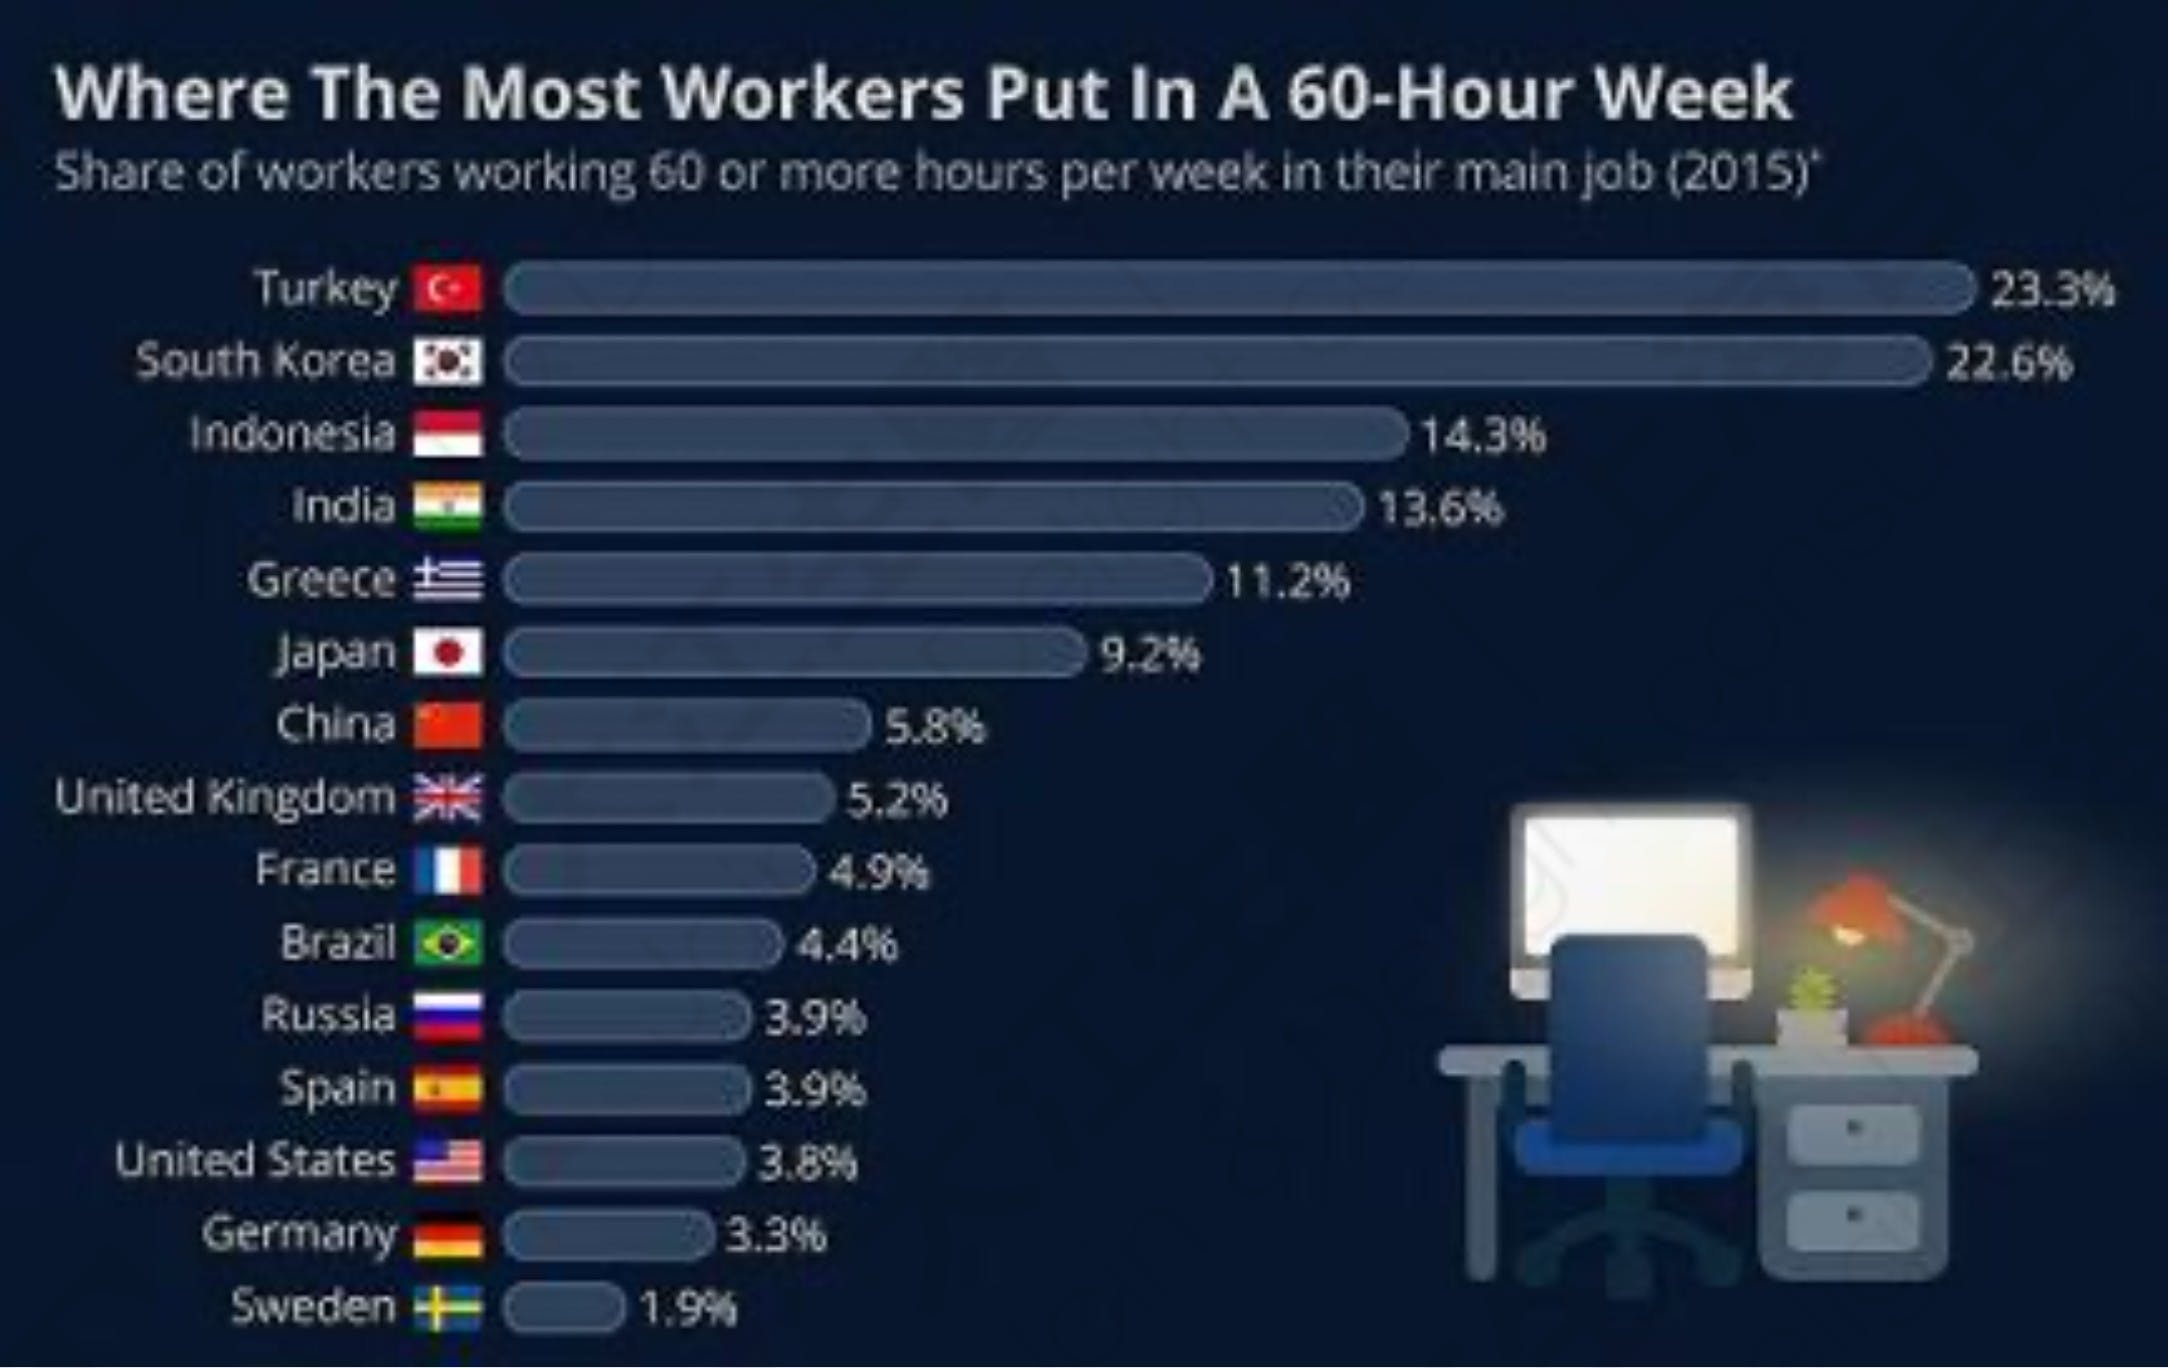 Ranking of working over 60 hours per week, Source: Forbes